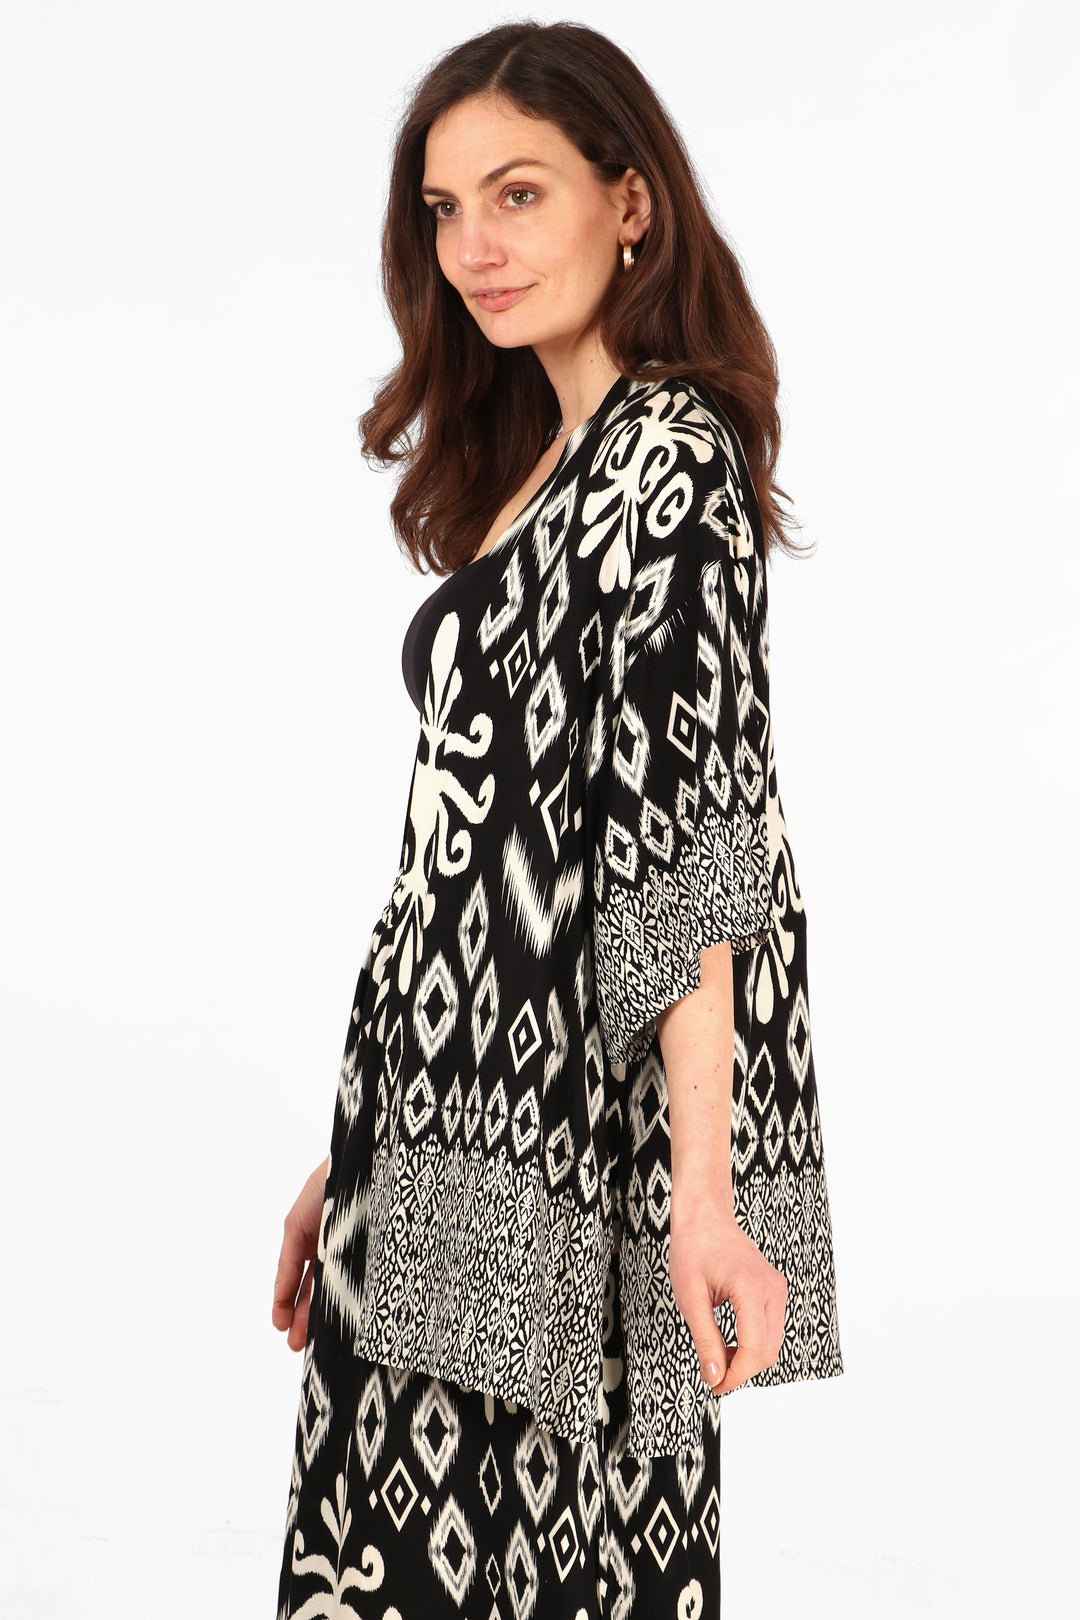 model wearing a black and white ikat pattern short kimono top with 3/4 sleeves and an open front